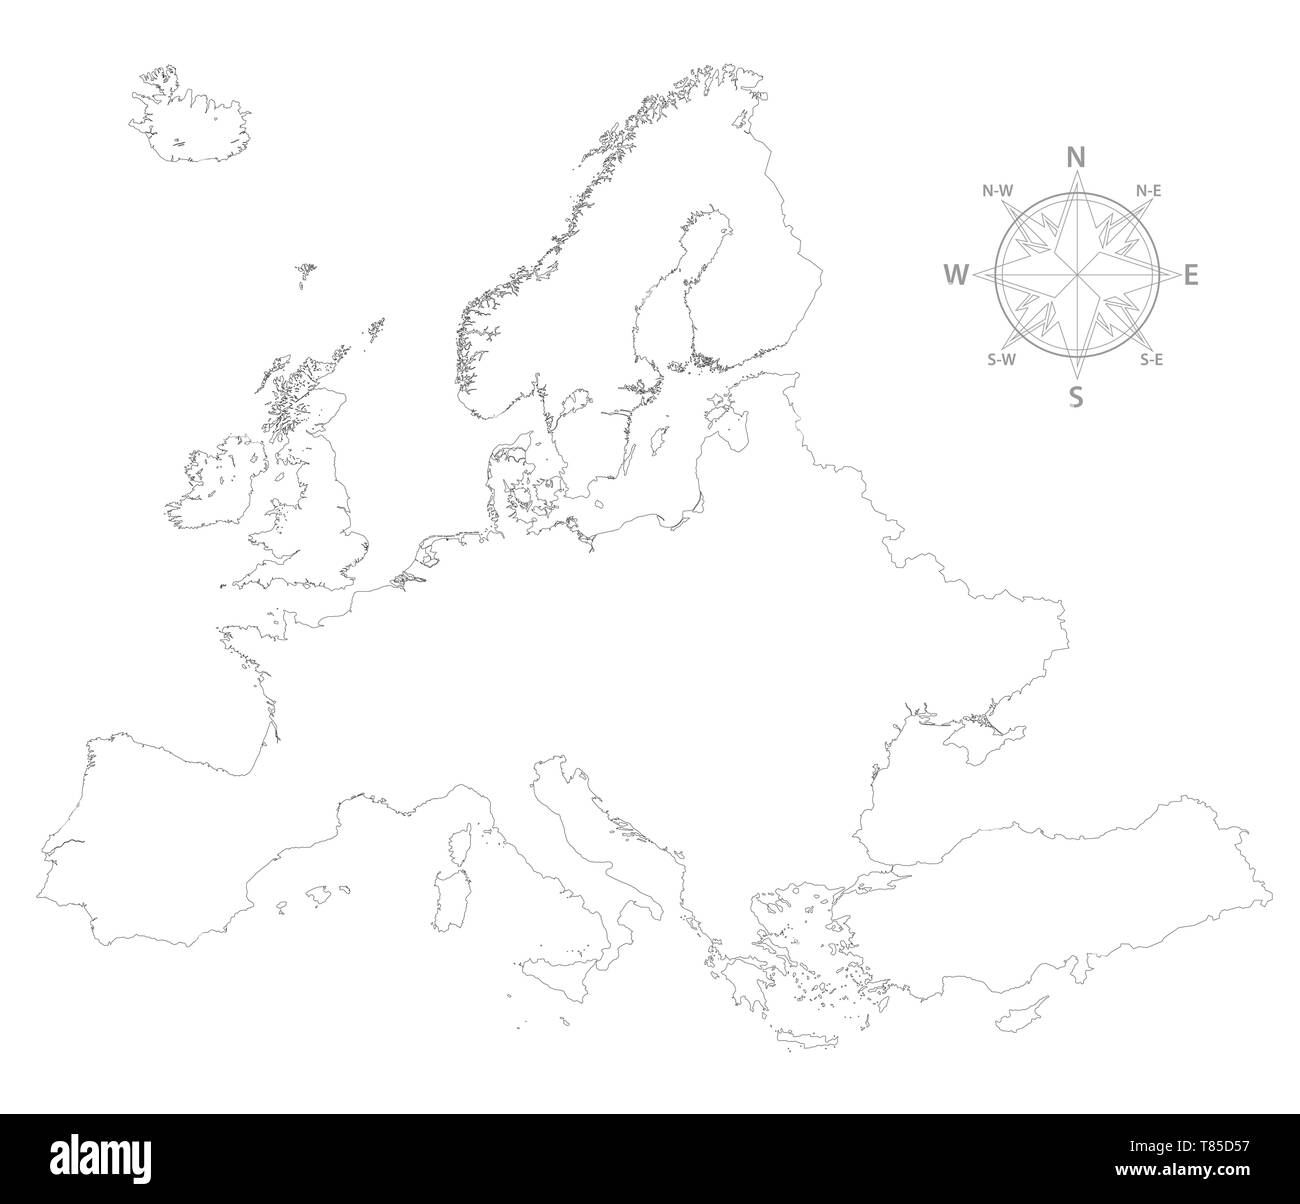 Europe vector high detailed map Stock Vector